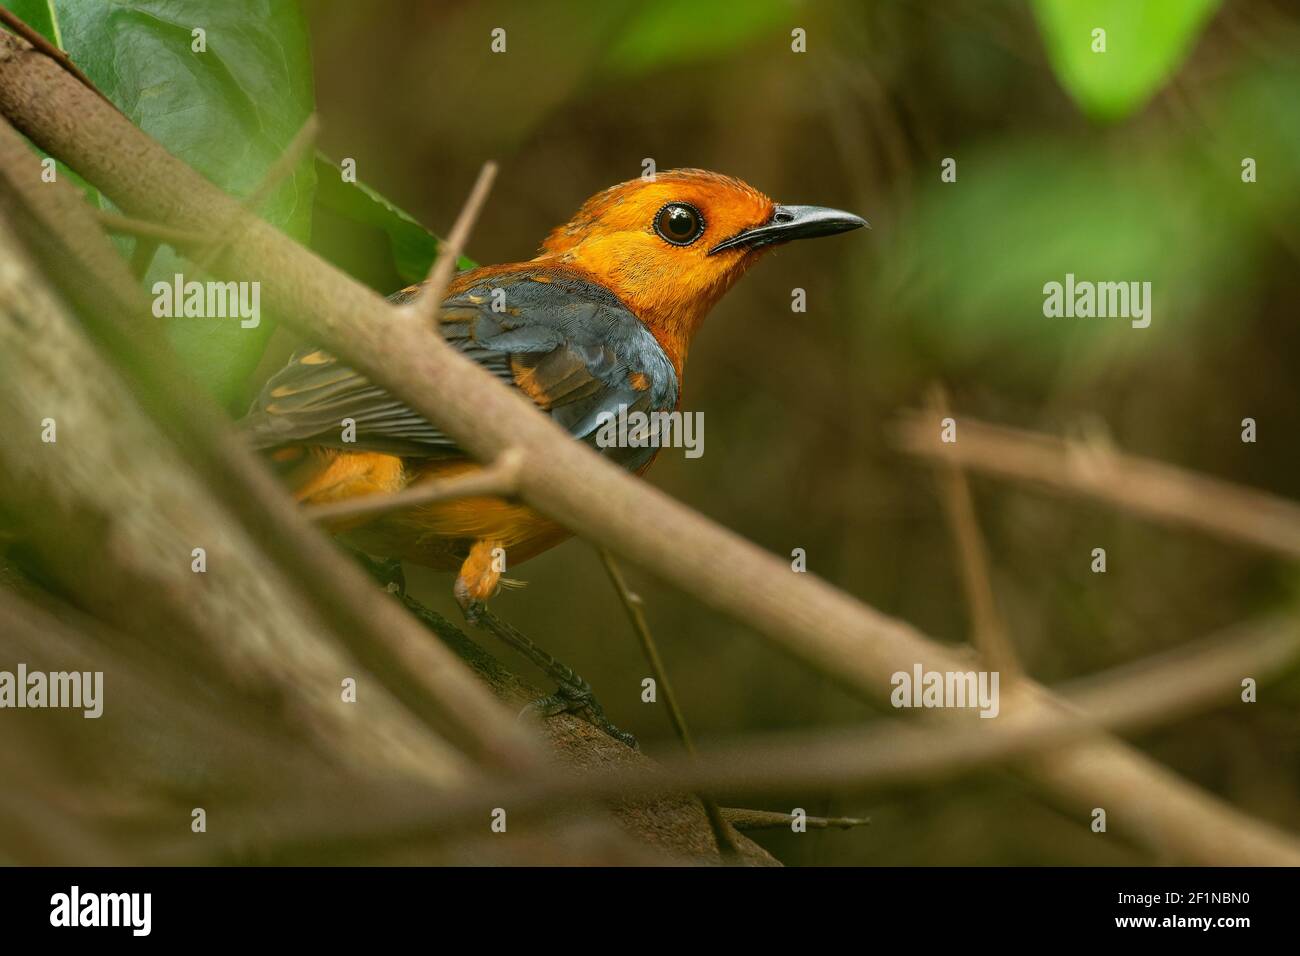 Red-capped Robin-chat or Natal robin - Cossypha natalensis bird in the family Muscicapidae, found in Africa, african orange songbird on the green back Stock Photo